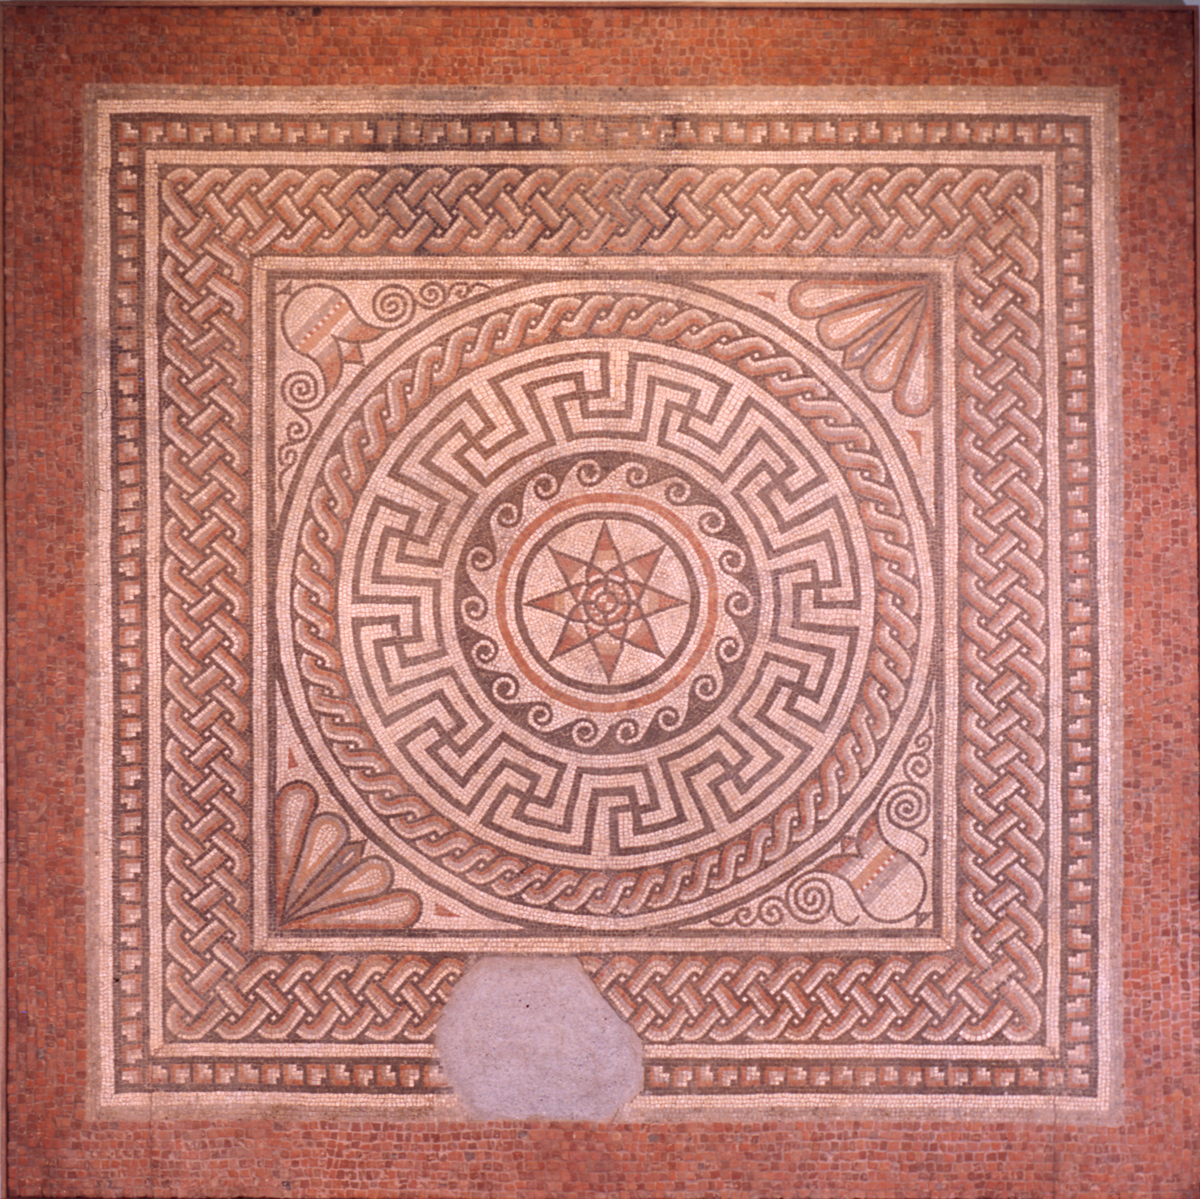 3/4 Staggered Roman Square Mosaic